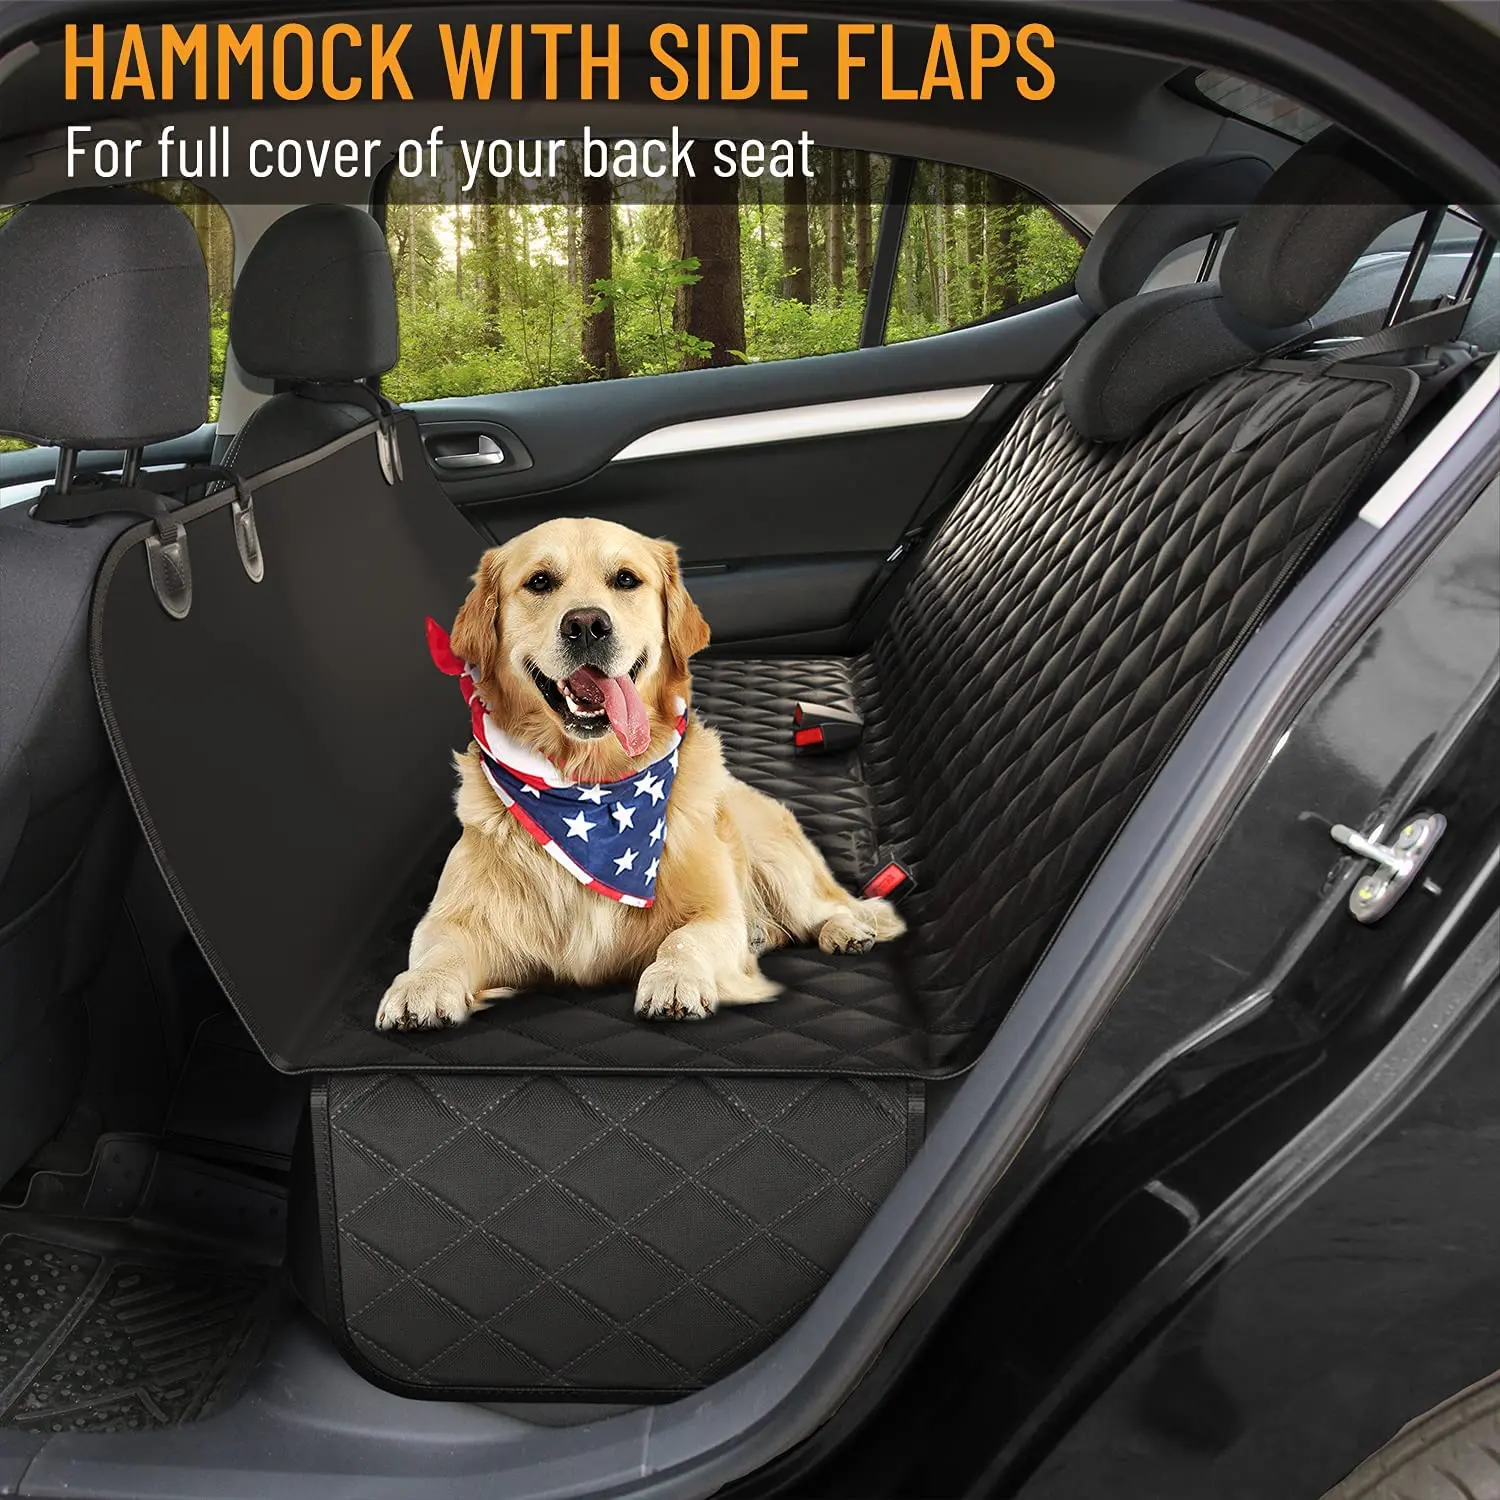 

Dog Car Seat Protector Waterproof Hammock Car Front Seat Cover Back Seat Protector Mat Safety Carrier For Dog Transportin Perro